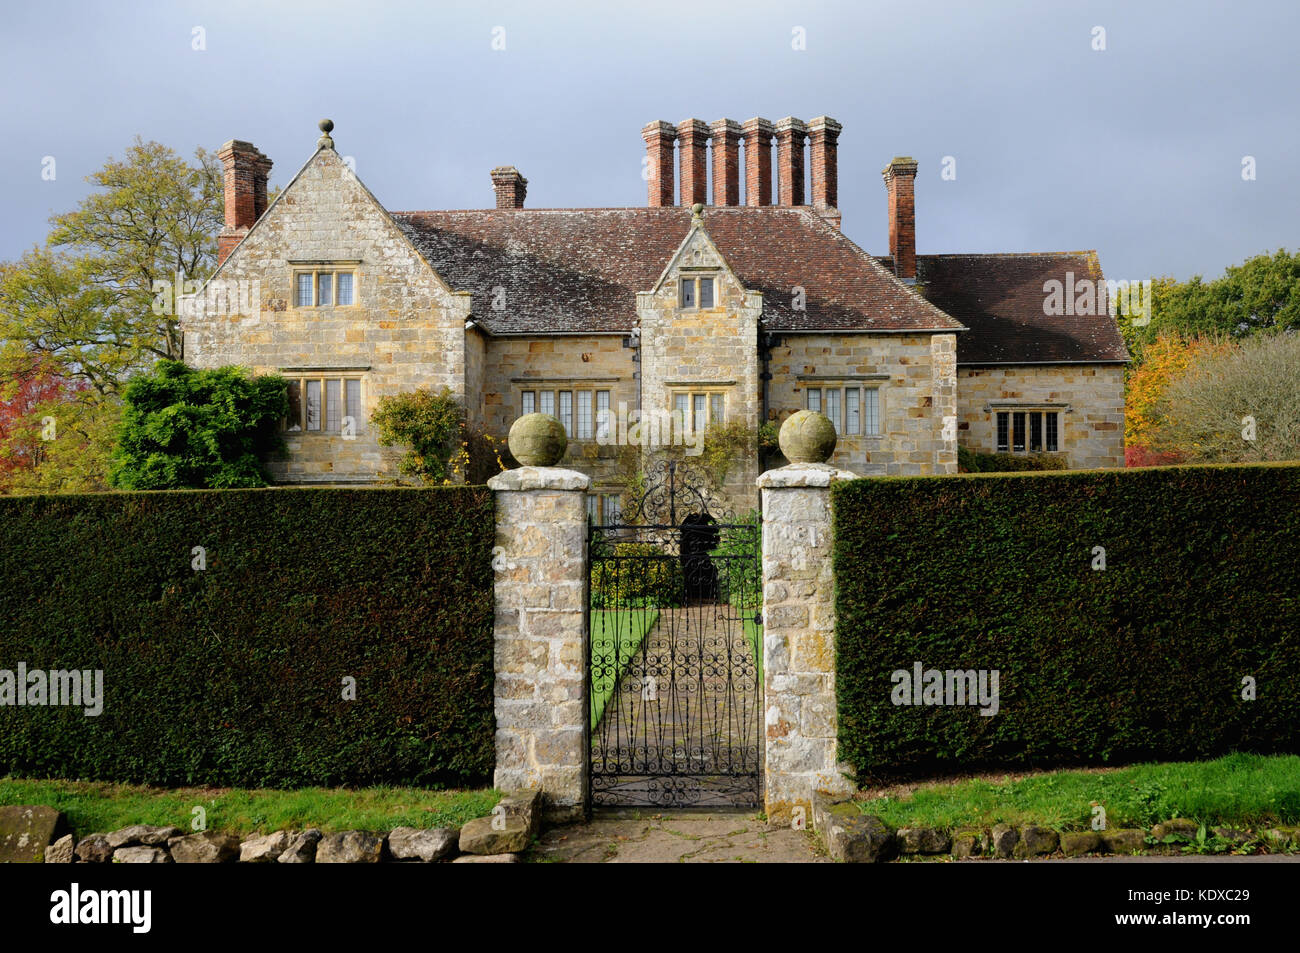 Batemans, the family home of Rudyard Kipling from 1902-1936, deep in the east Sussex countryside. (Viewed from the public highway.) Stock Photo